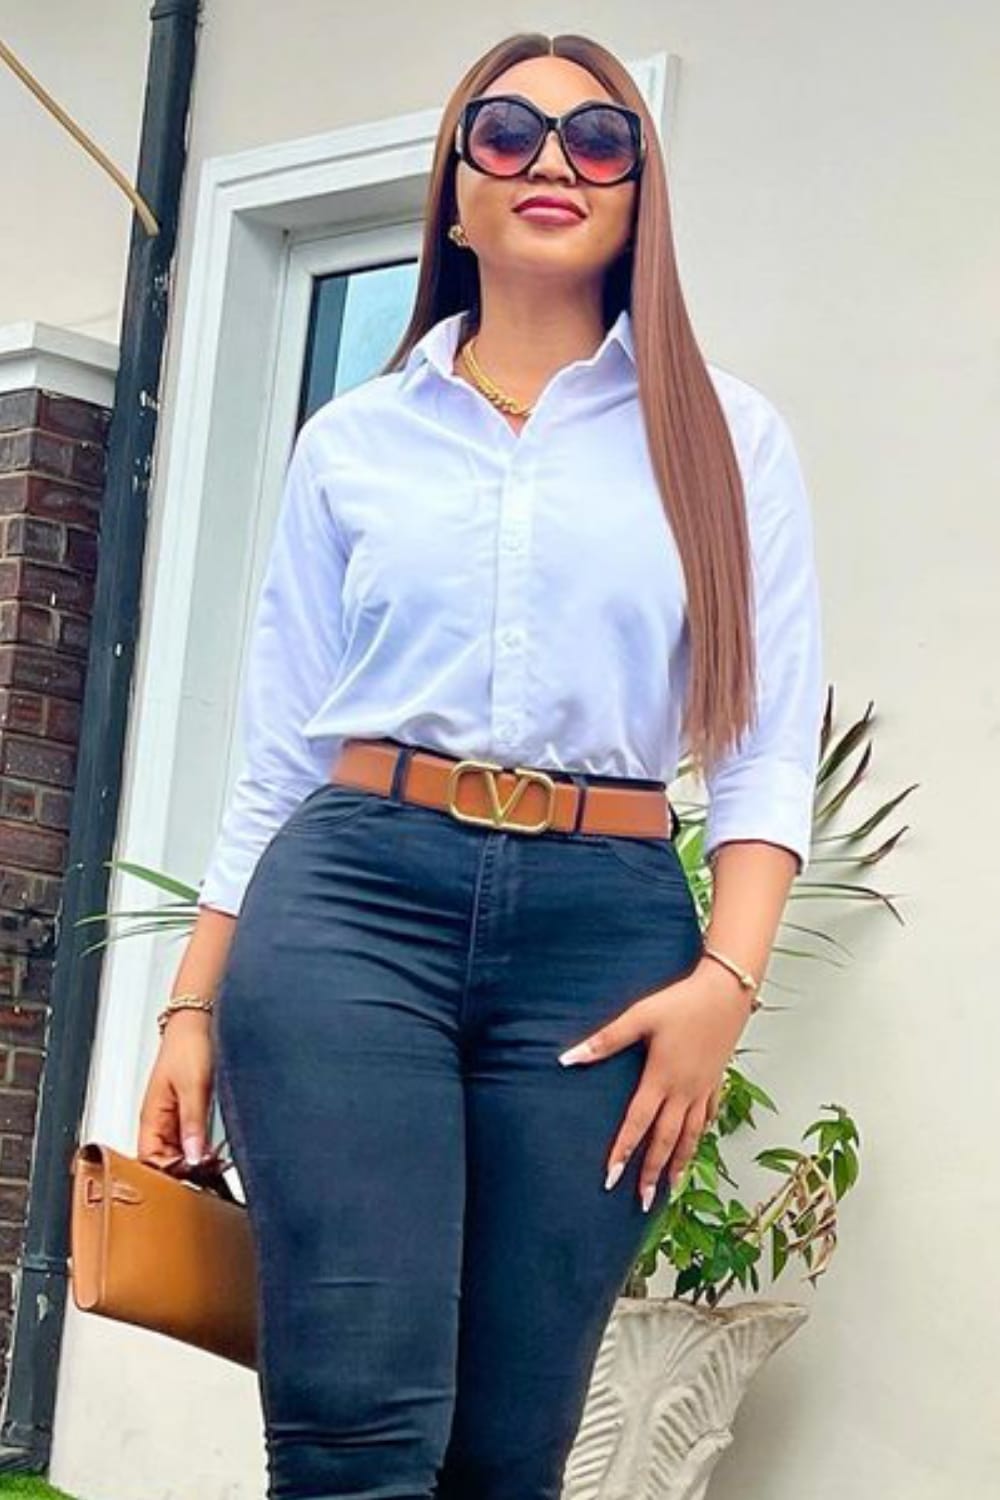 "Come out for governorship, we'll support you” - Reaction as Regina Daniels visits Asaba Specialist hospital alone (Video)